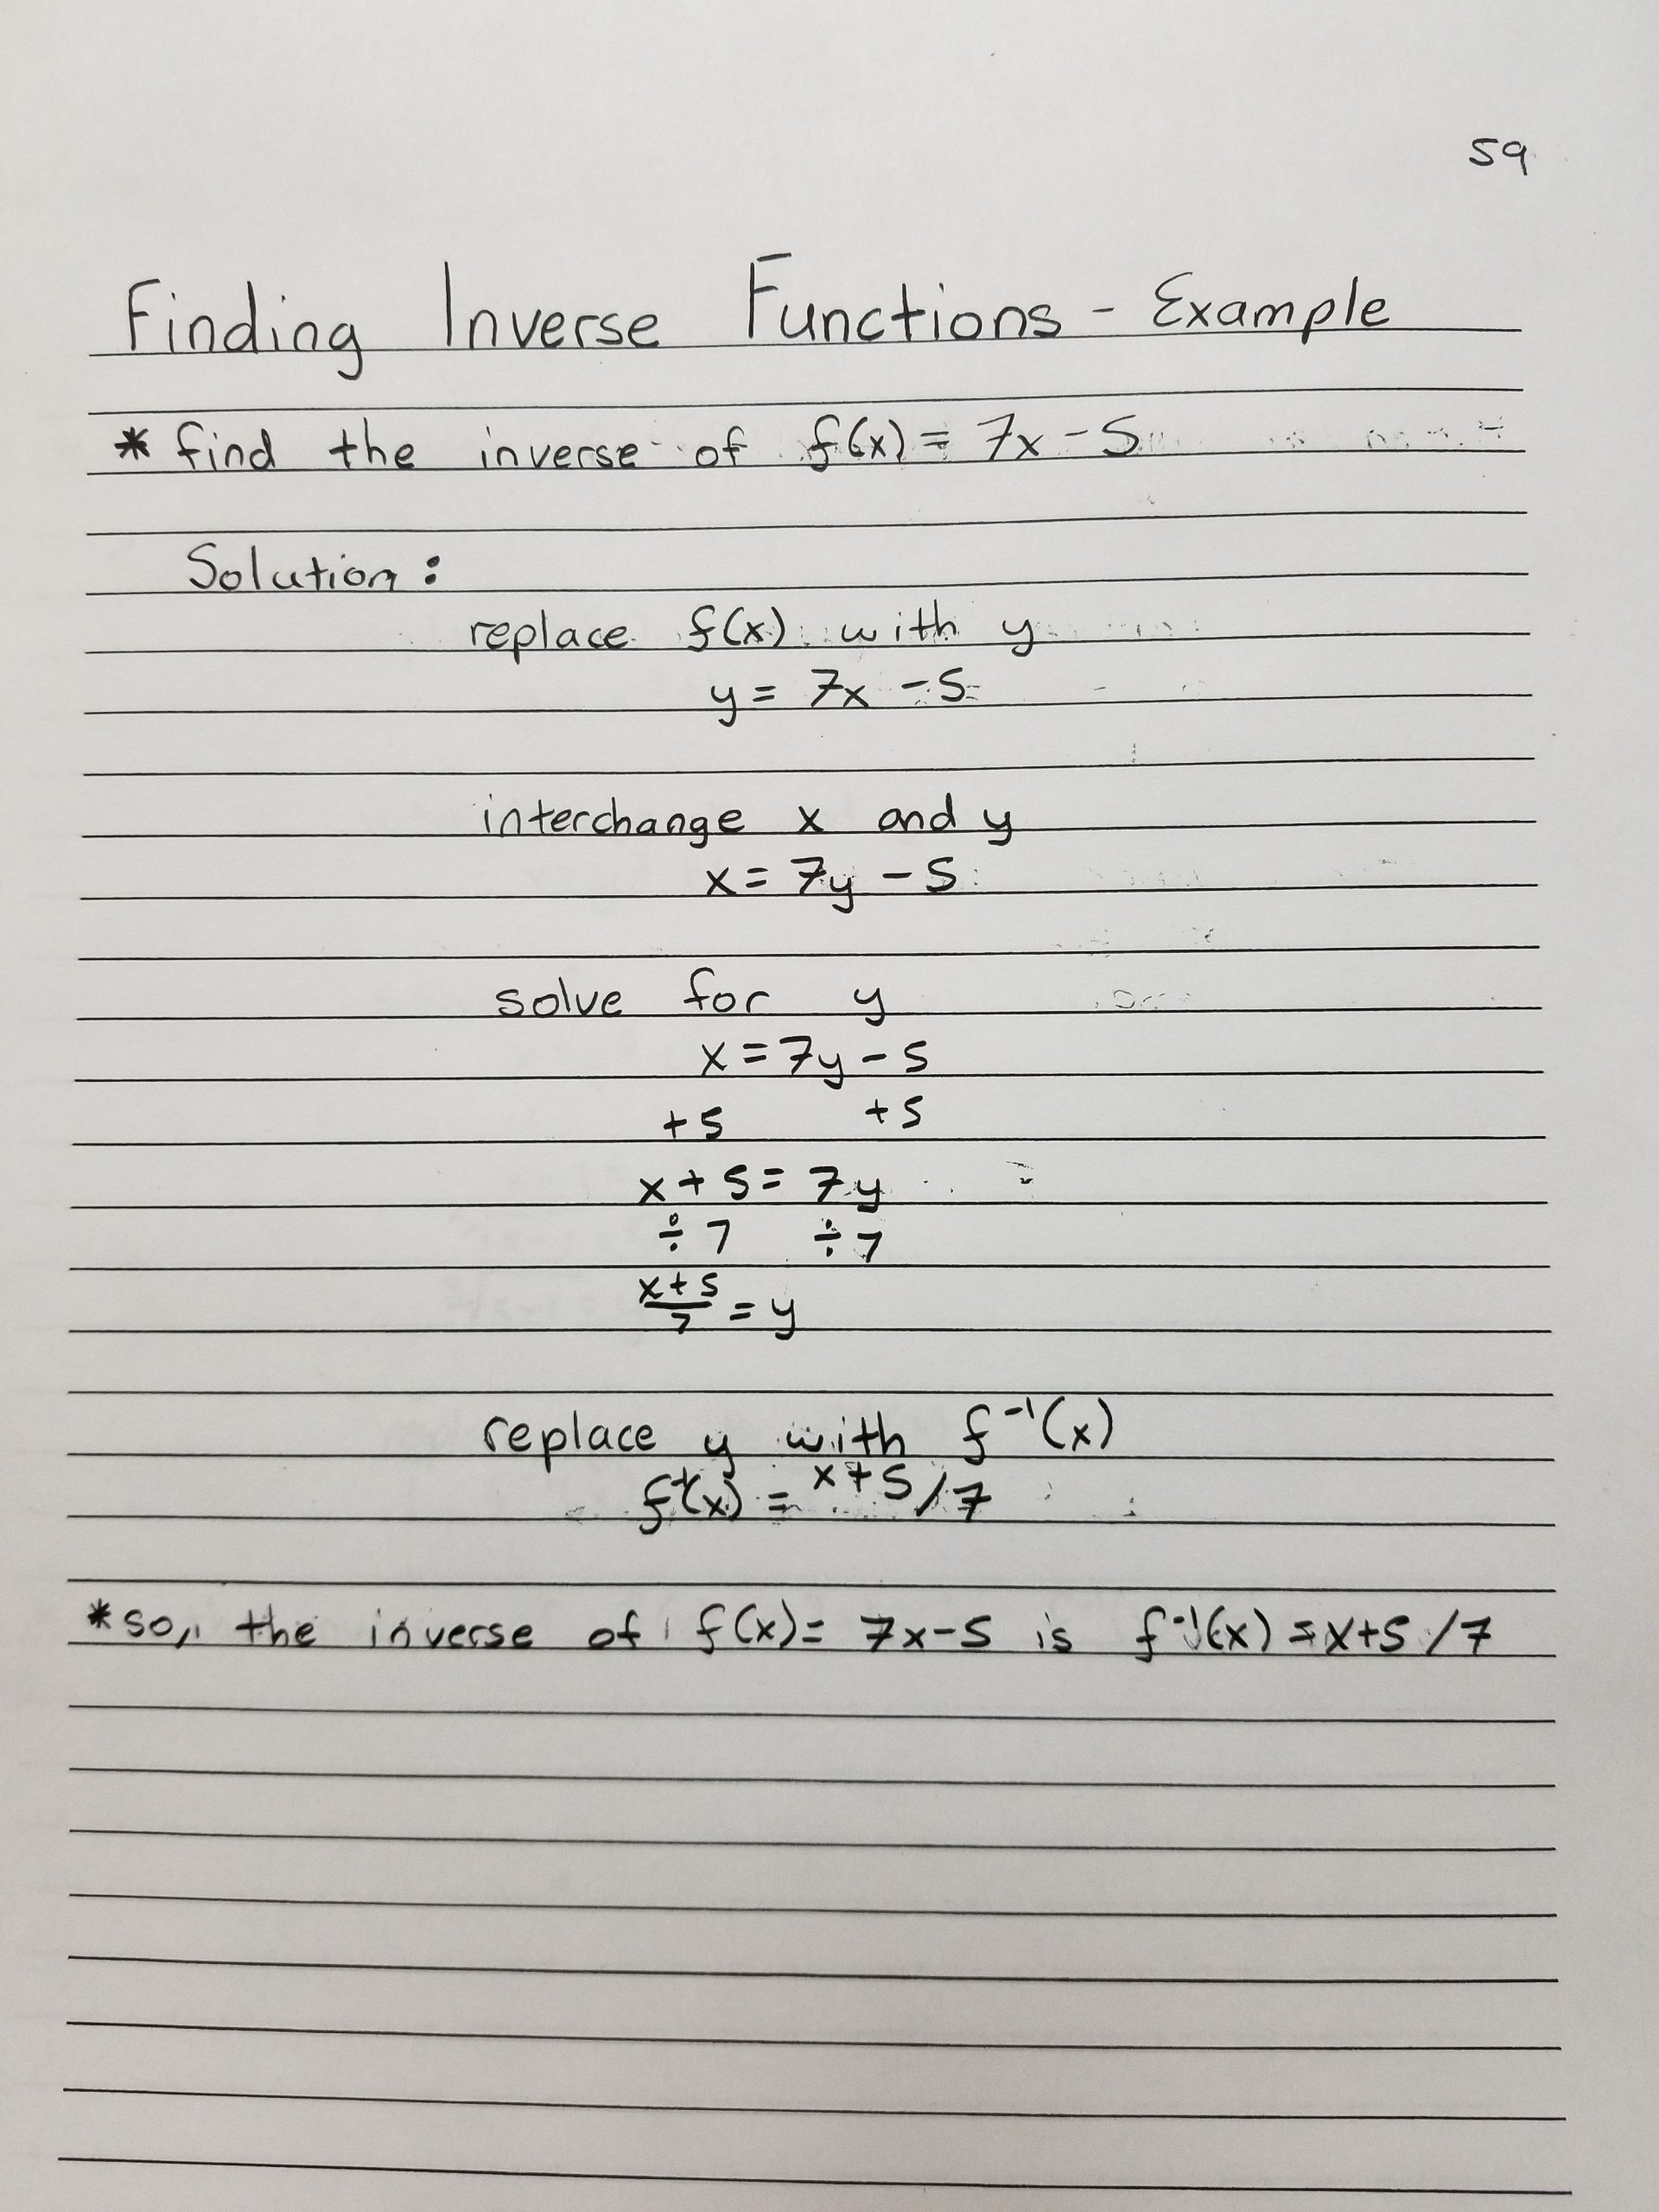 Inverse Functions Worksheet with Answers Finding Inverse Functions Example 1